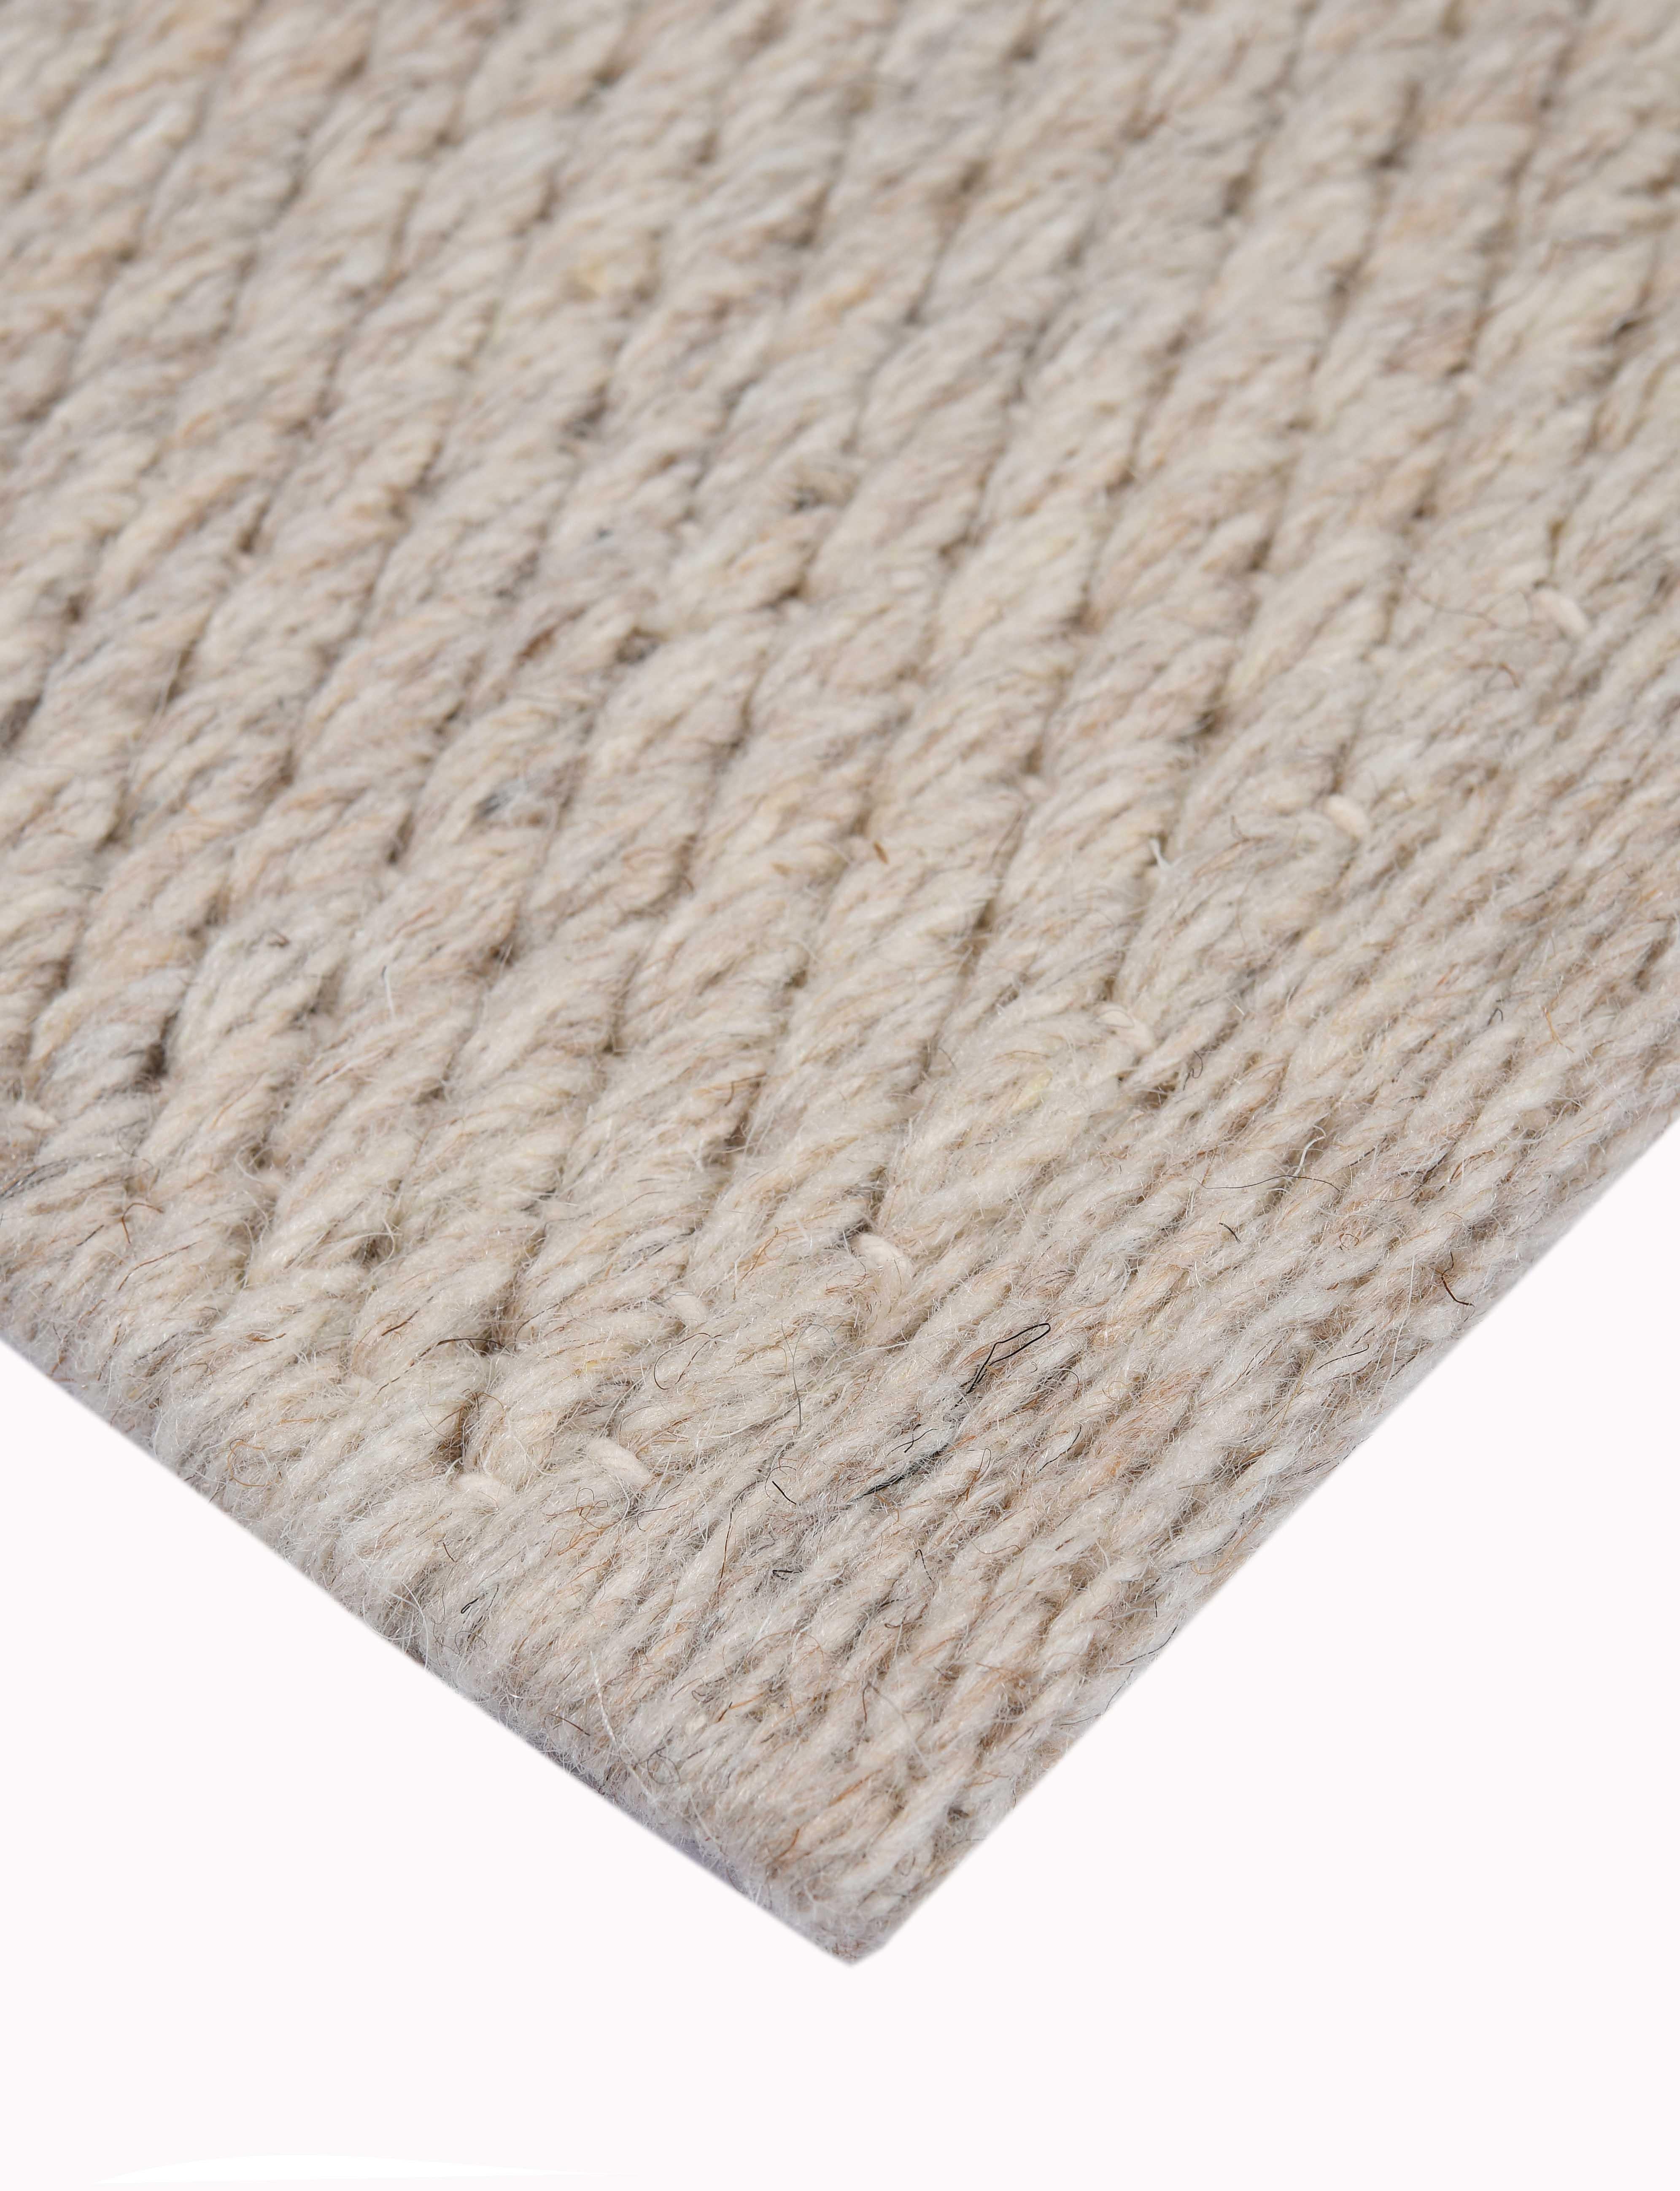 Quies, Beige, Handwoven, New Zealand and Mediterranean wools, 6' x 9' In New Condition For Sale In New York, NY